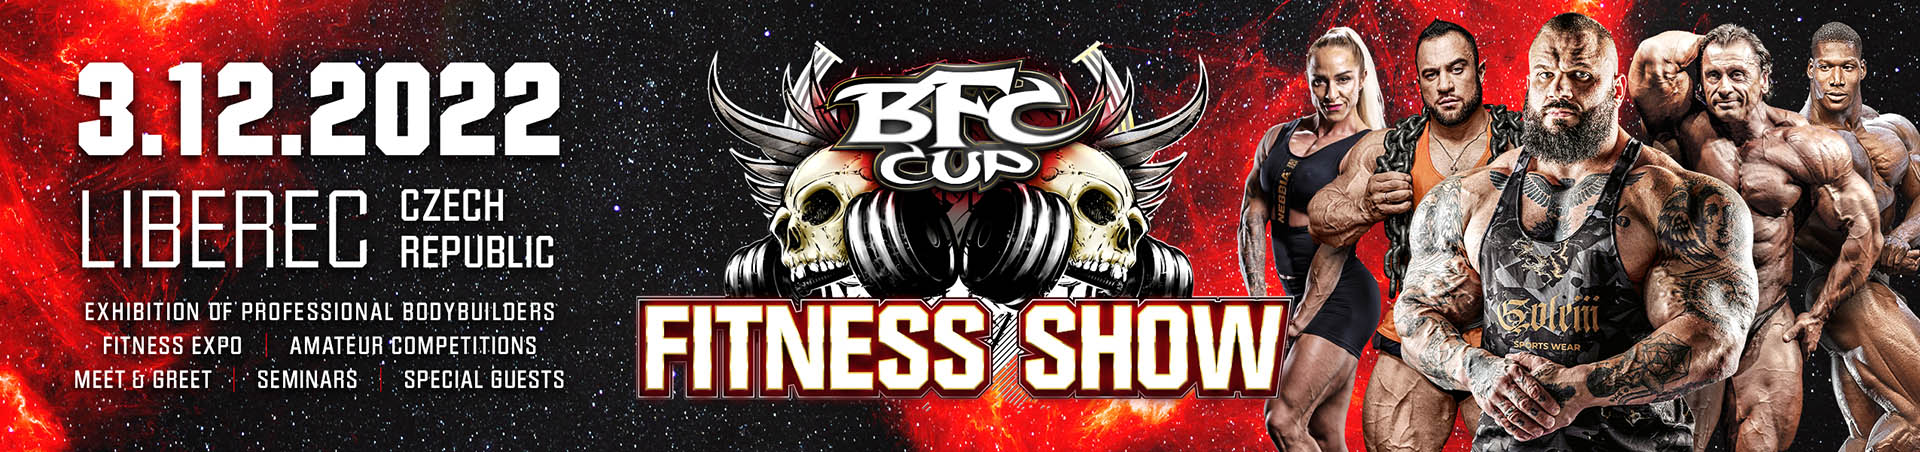 IFBB BFC CUP FITNESS SHOW